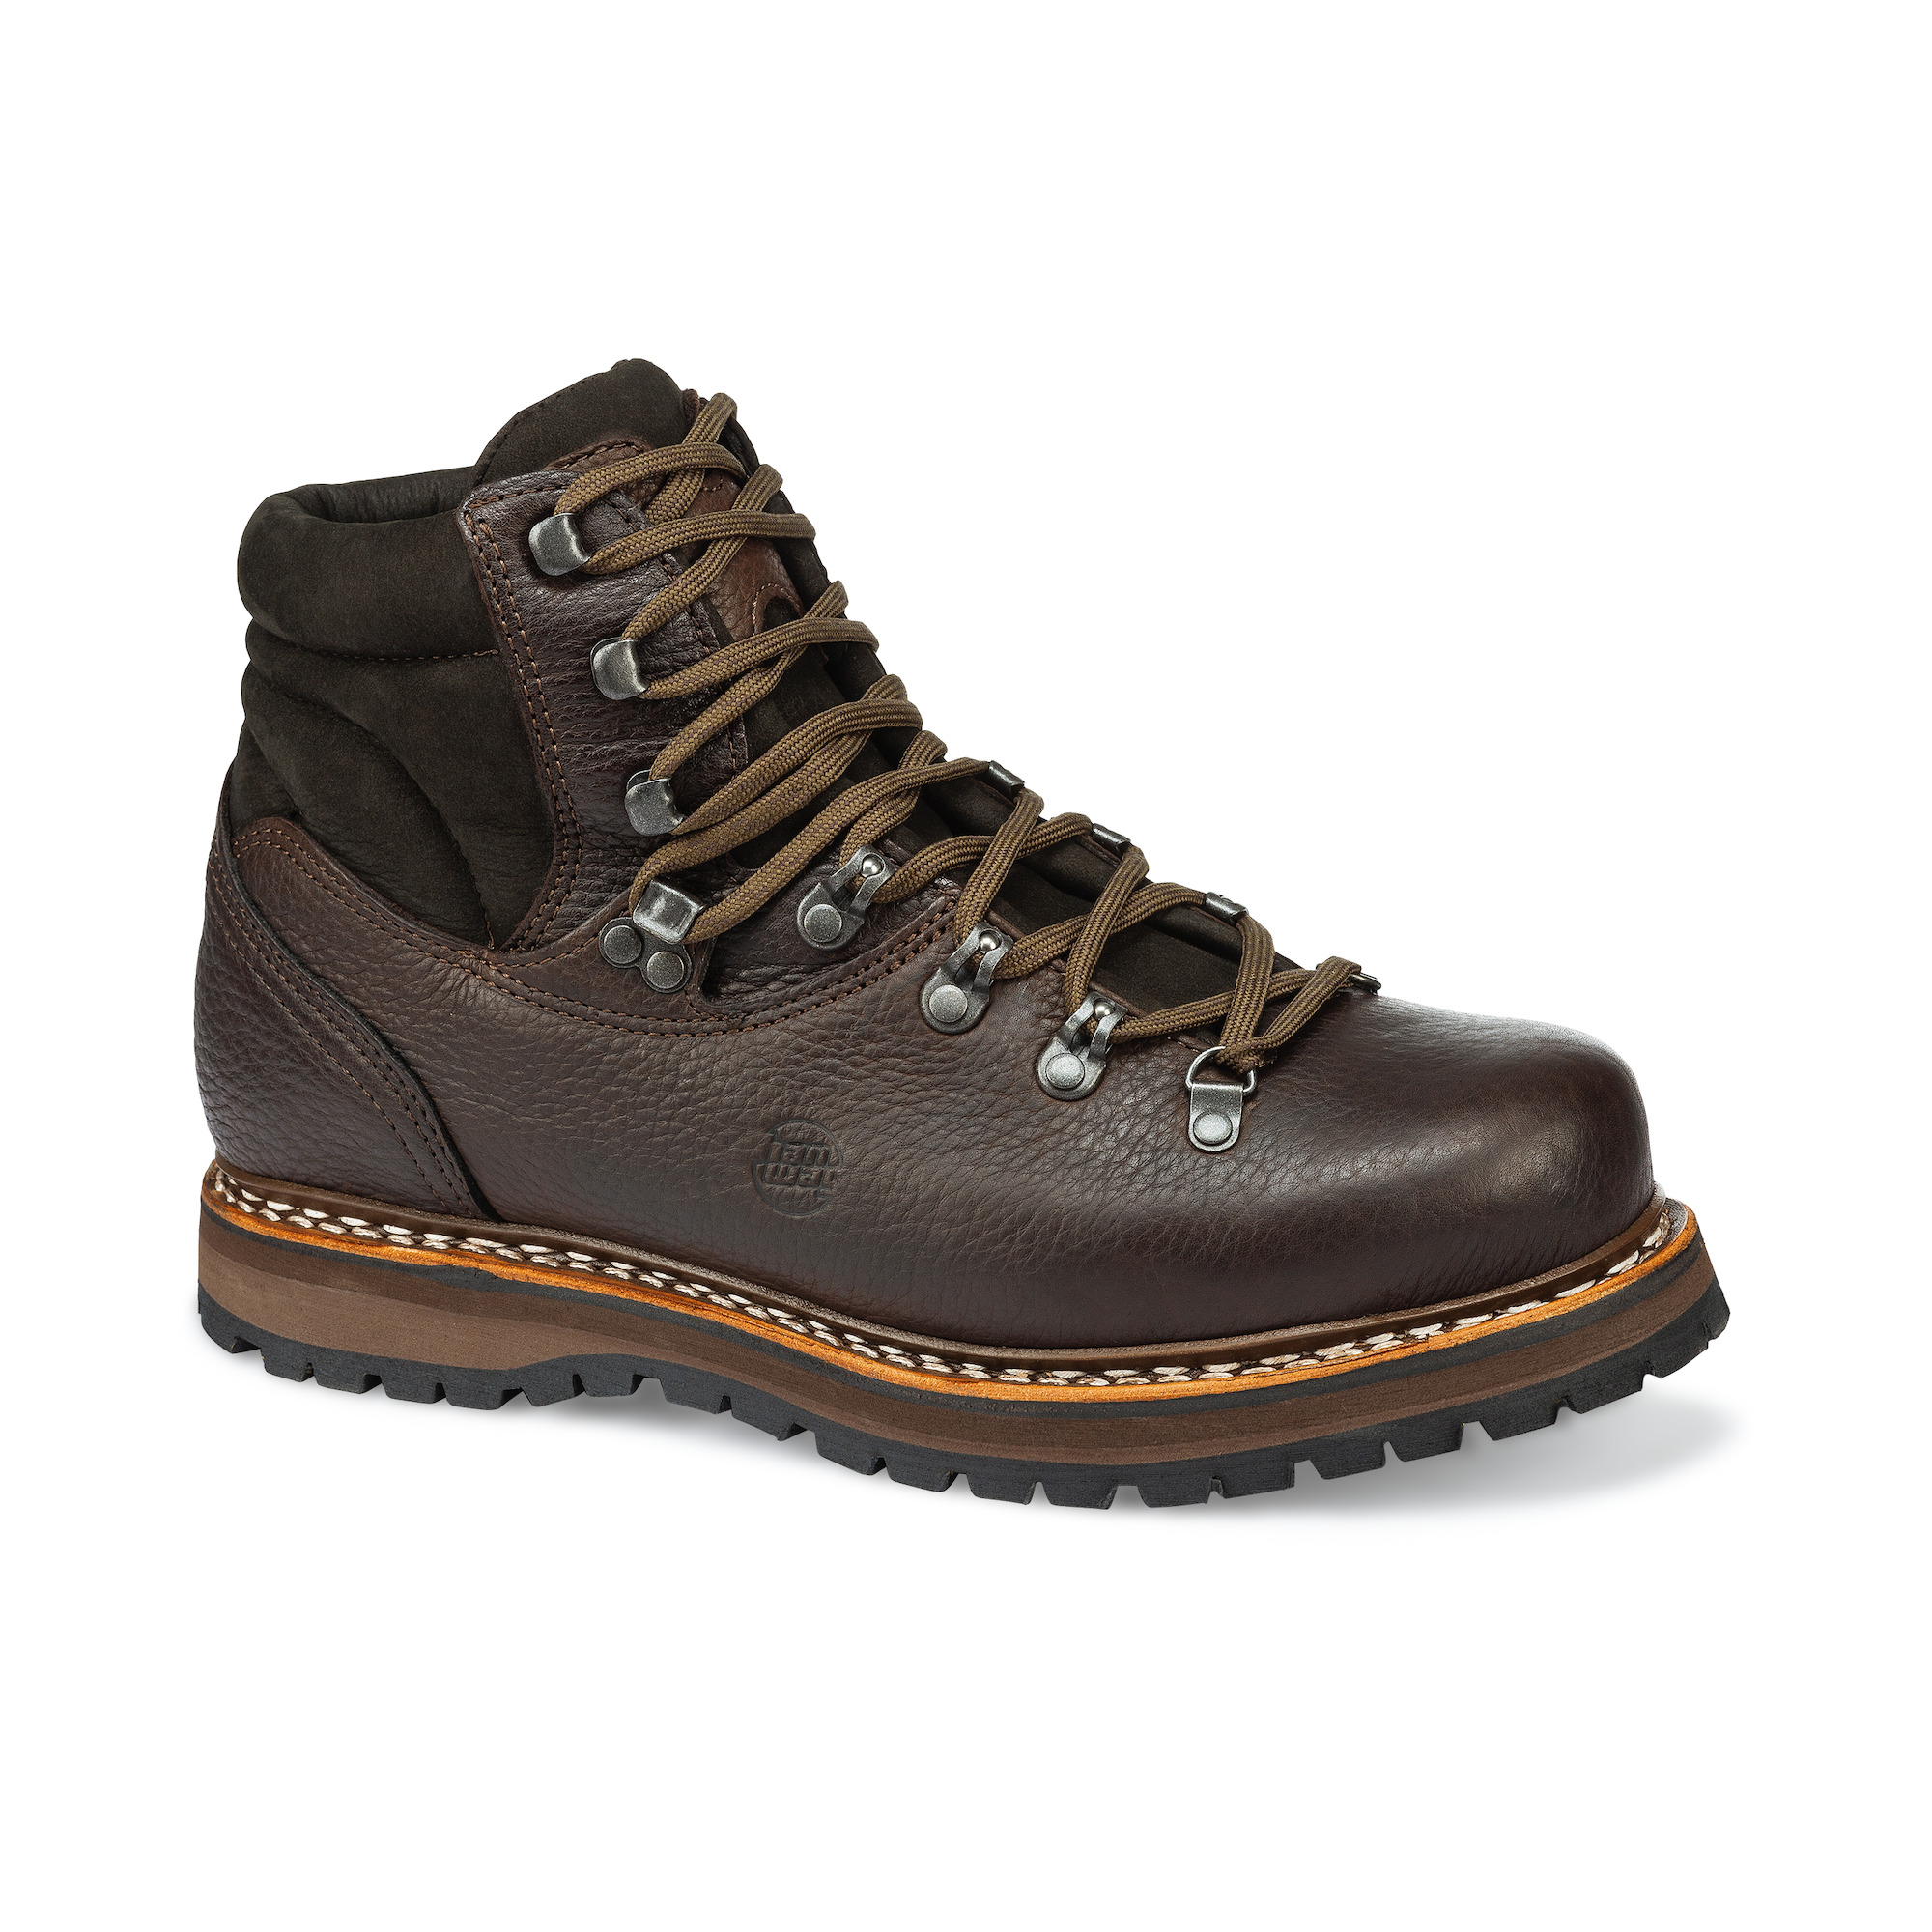 Men's Yak Leather Boots | Hanwag